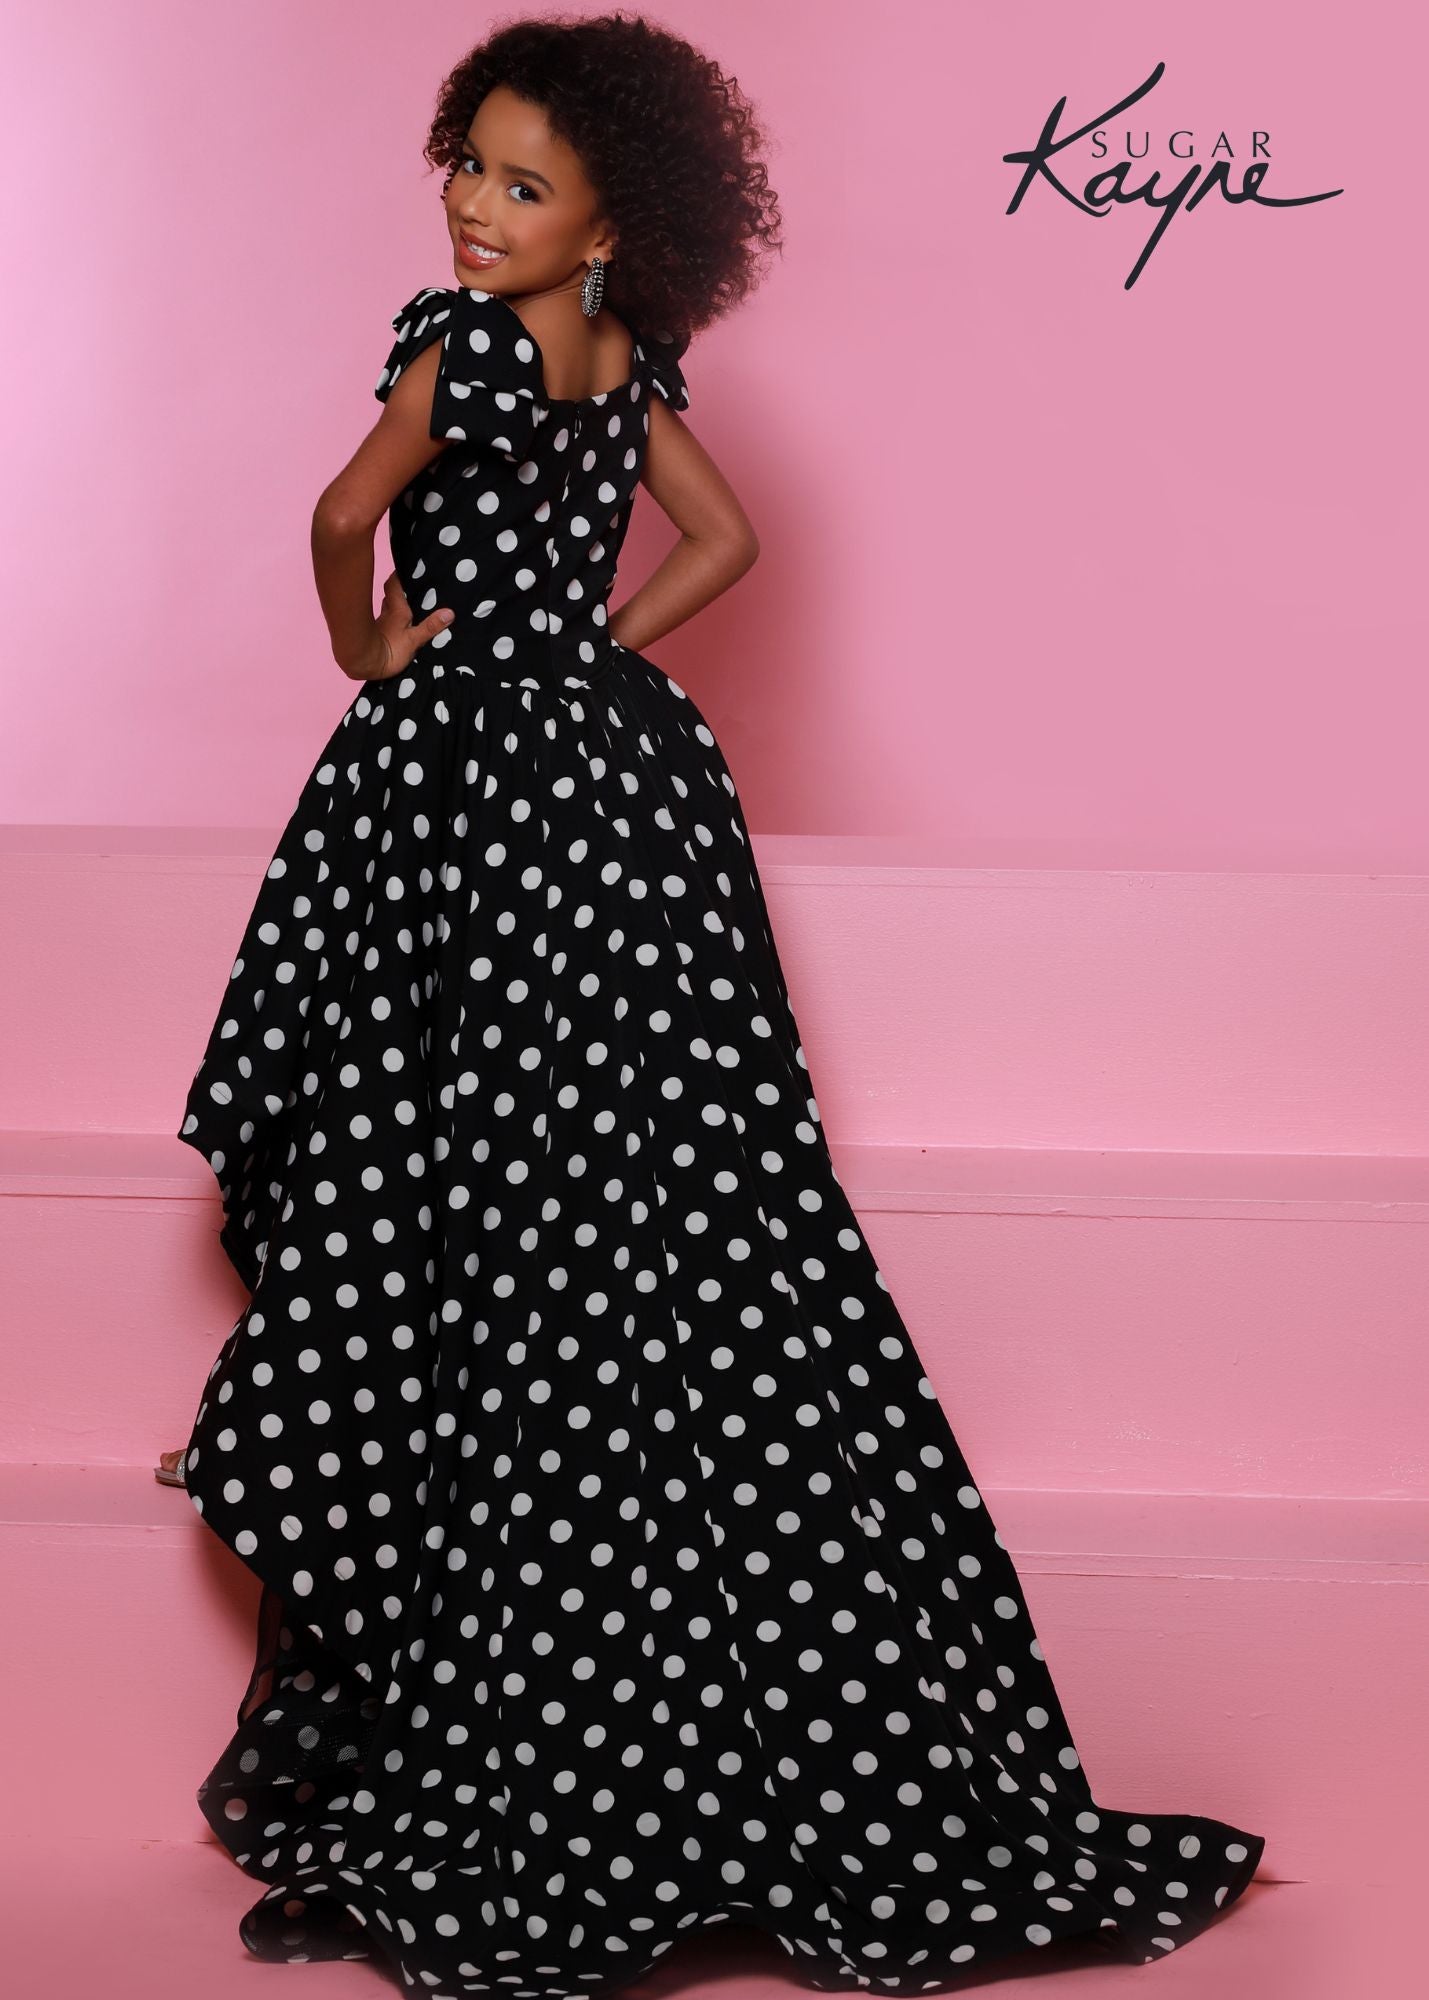 Sugar Kayne C324 Girls High Low Polka Dot Pageant Dress Fun Fashion Formal Wear Train Polka dots are the perfect accessory. Rock your next fun fashion in this hi-low stretch crepe dress. The long train completes the look.  Colors: Black-White  Sizes: 2, 4, 6, 8, 10, 12, 14, 16  Fabric Stretch Crepe, Stretch Lining